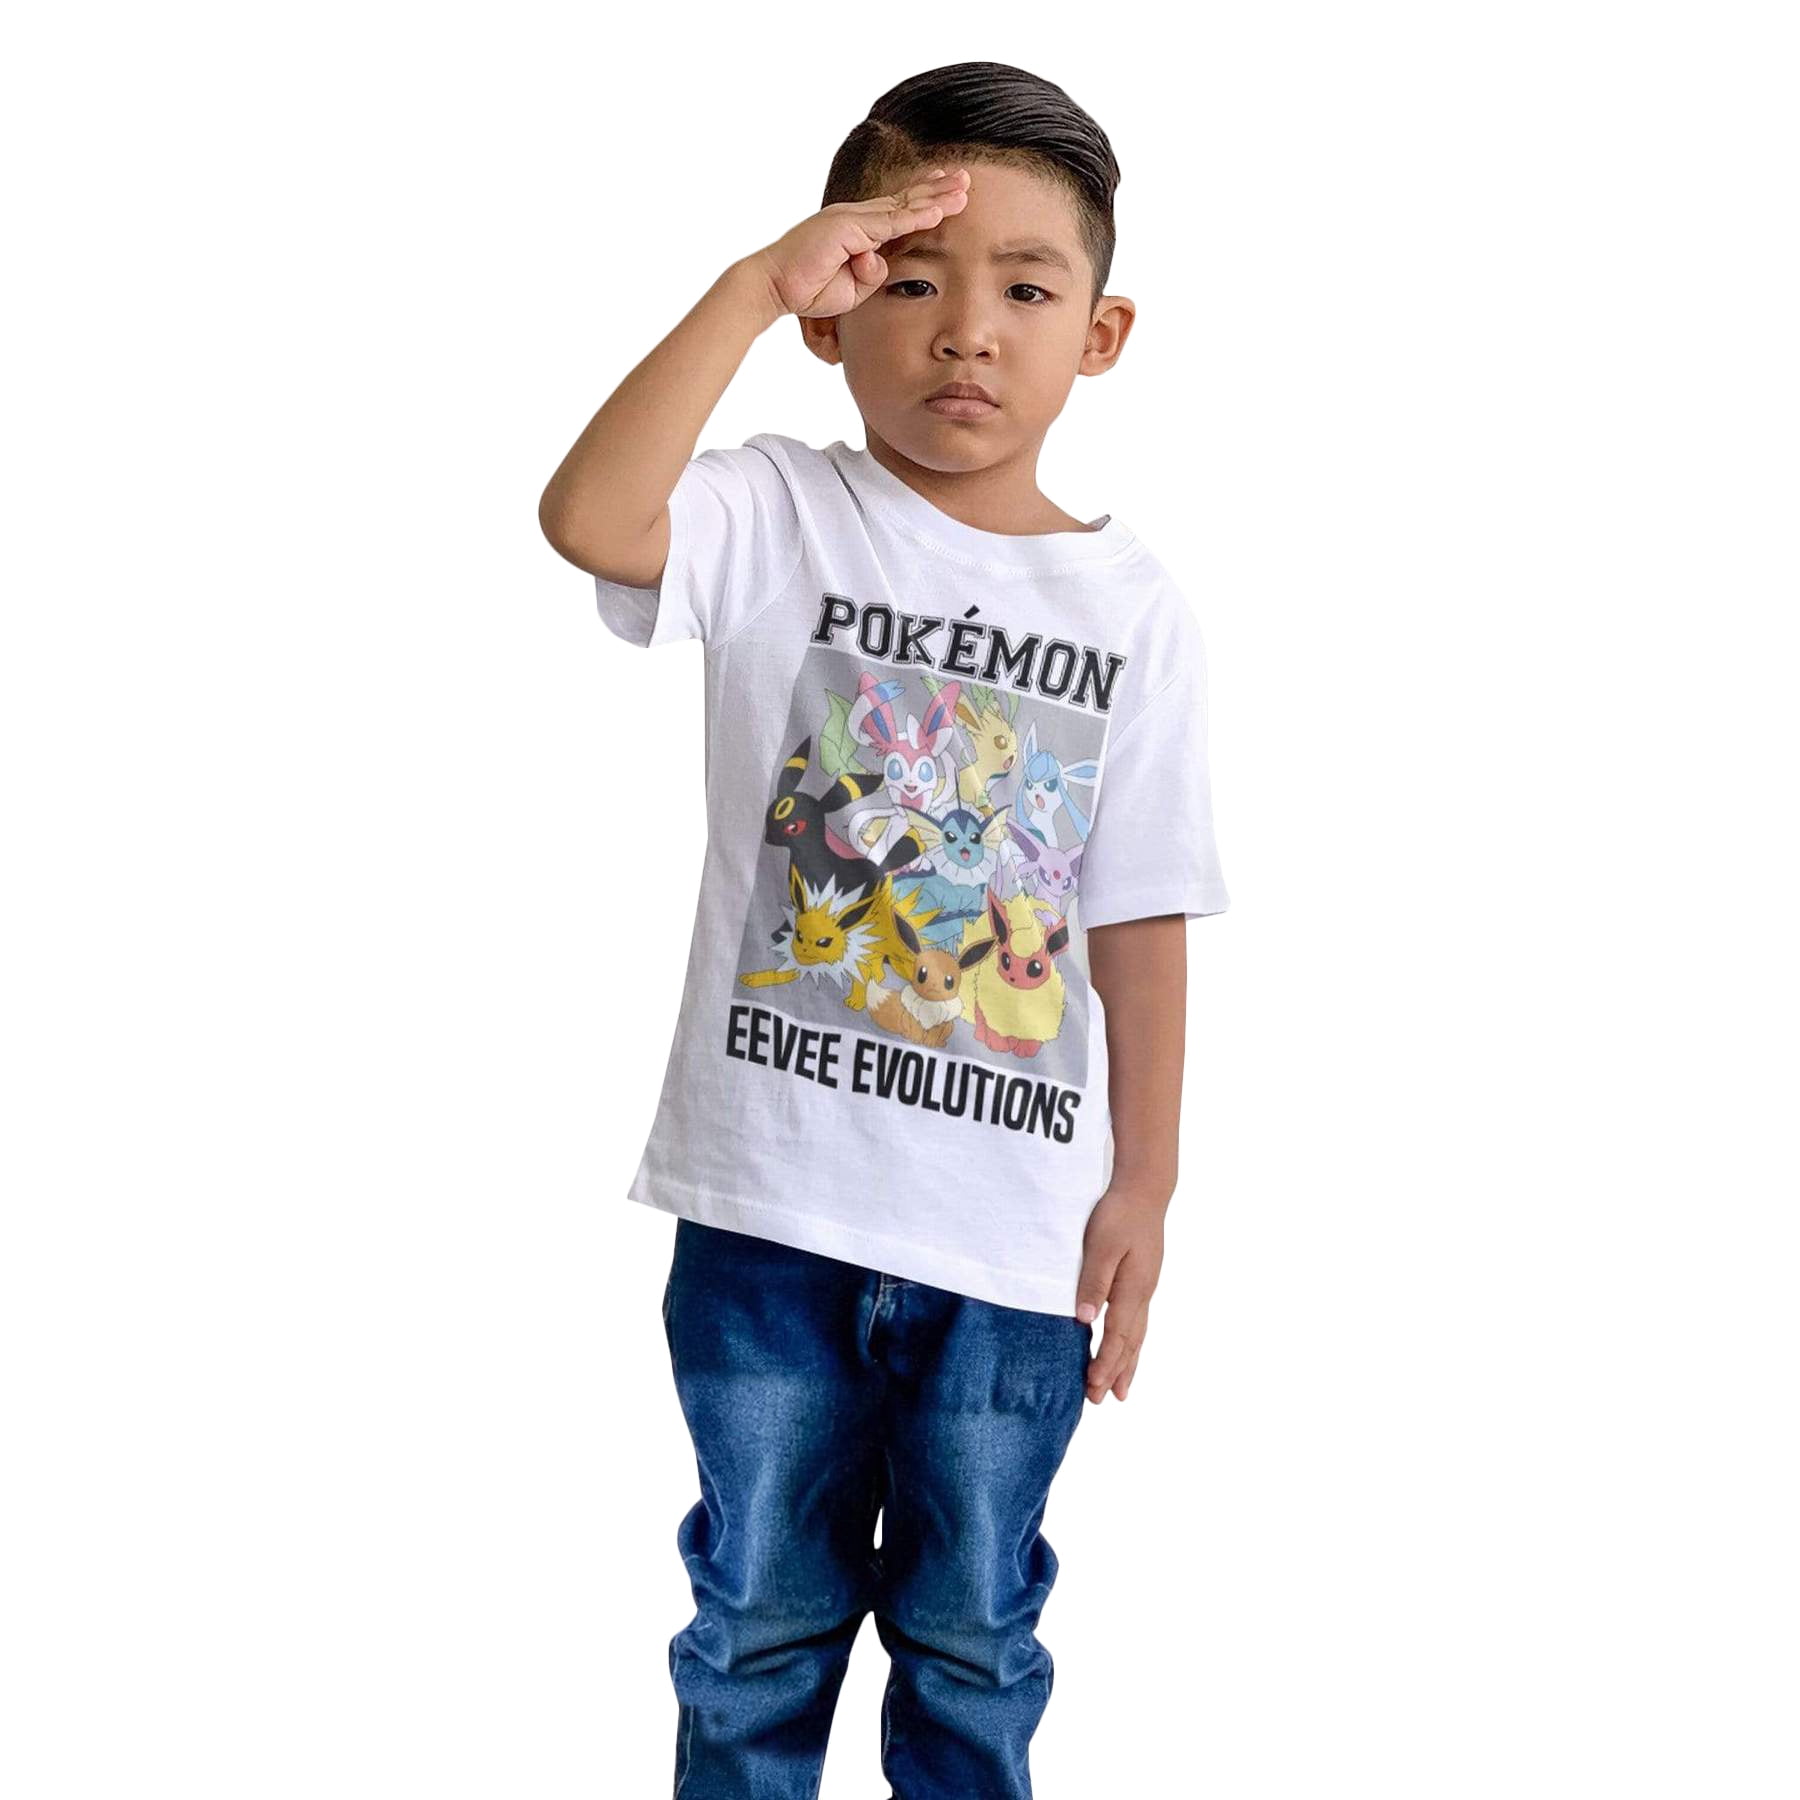 E-evee Evolution Fire Water Kids T-Shirts Long Sleeve Tees Fashion Tops for Boys/Girls